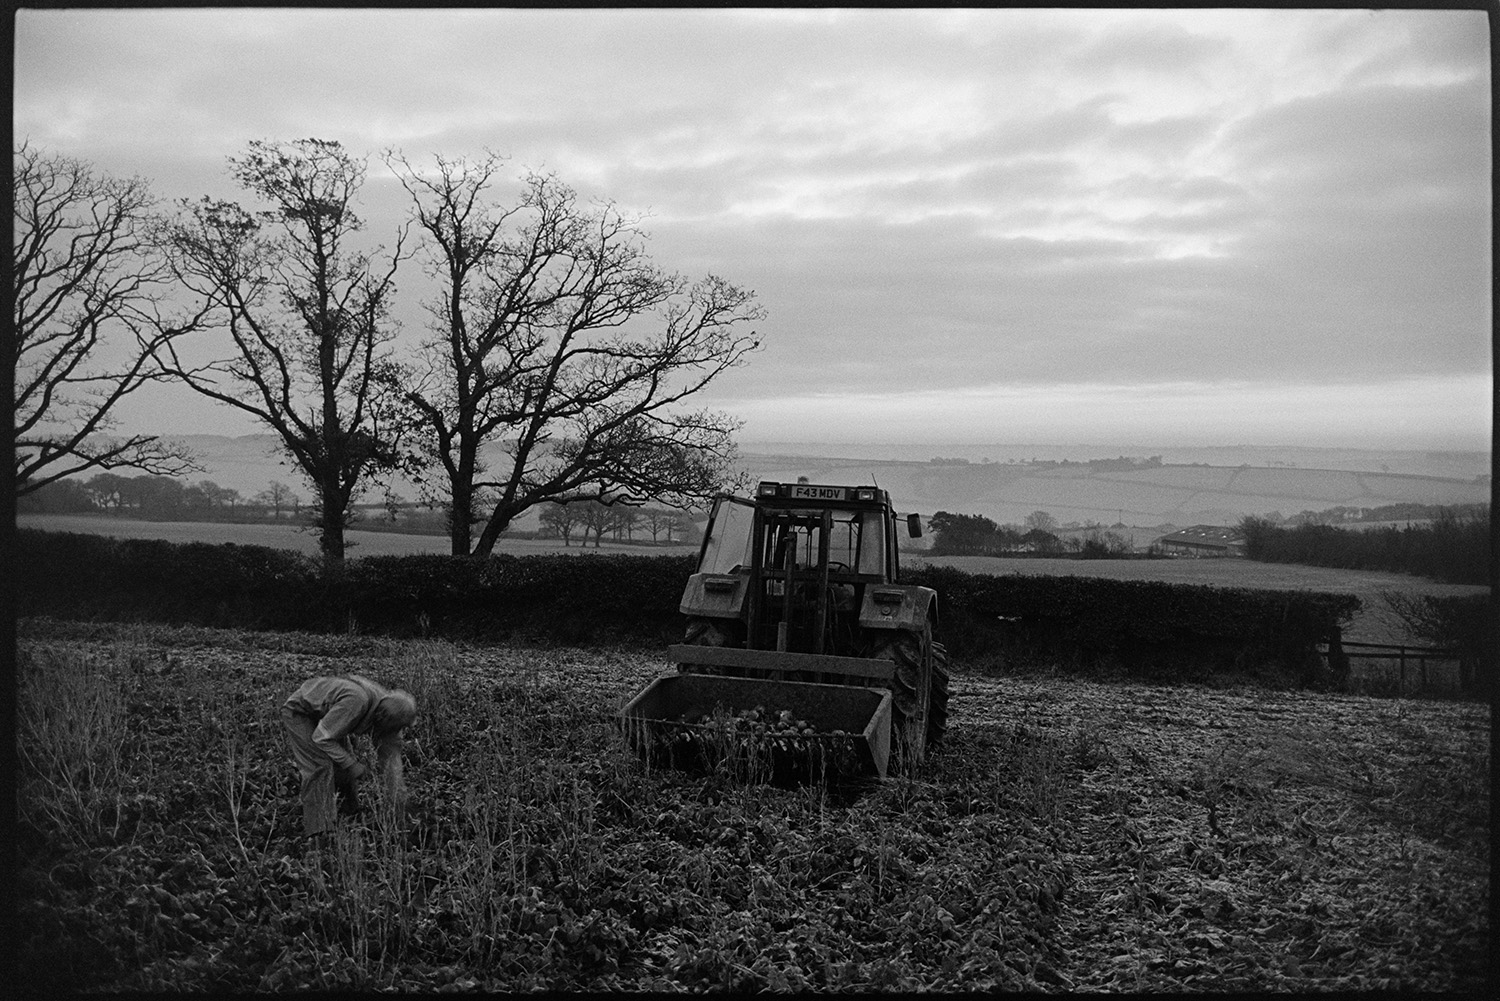 Farmer lifting swedes, early morning with frost. 
[A man lifting swedes by hand and putting them into a link box attached to a tractor, in a field at Parsonage Farm, Chulmleigh. The ground is frosty and early morning mist can be seen amongst the elm trees in the background.]